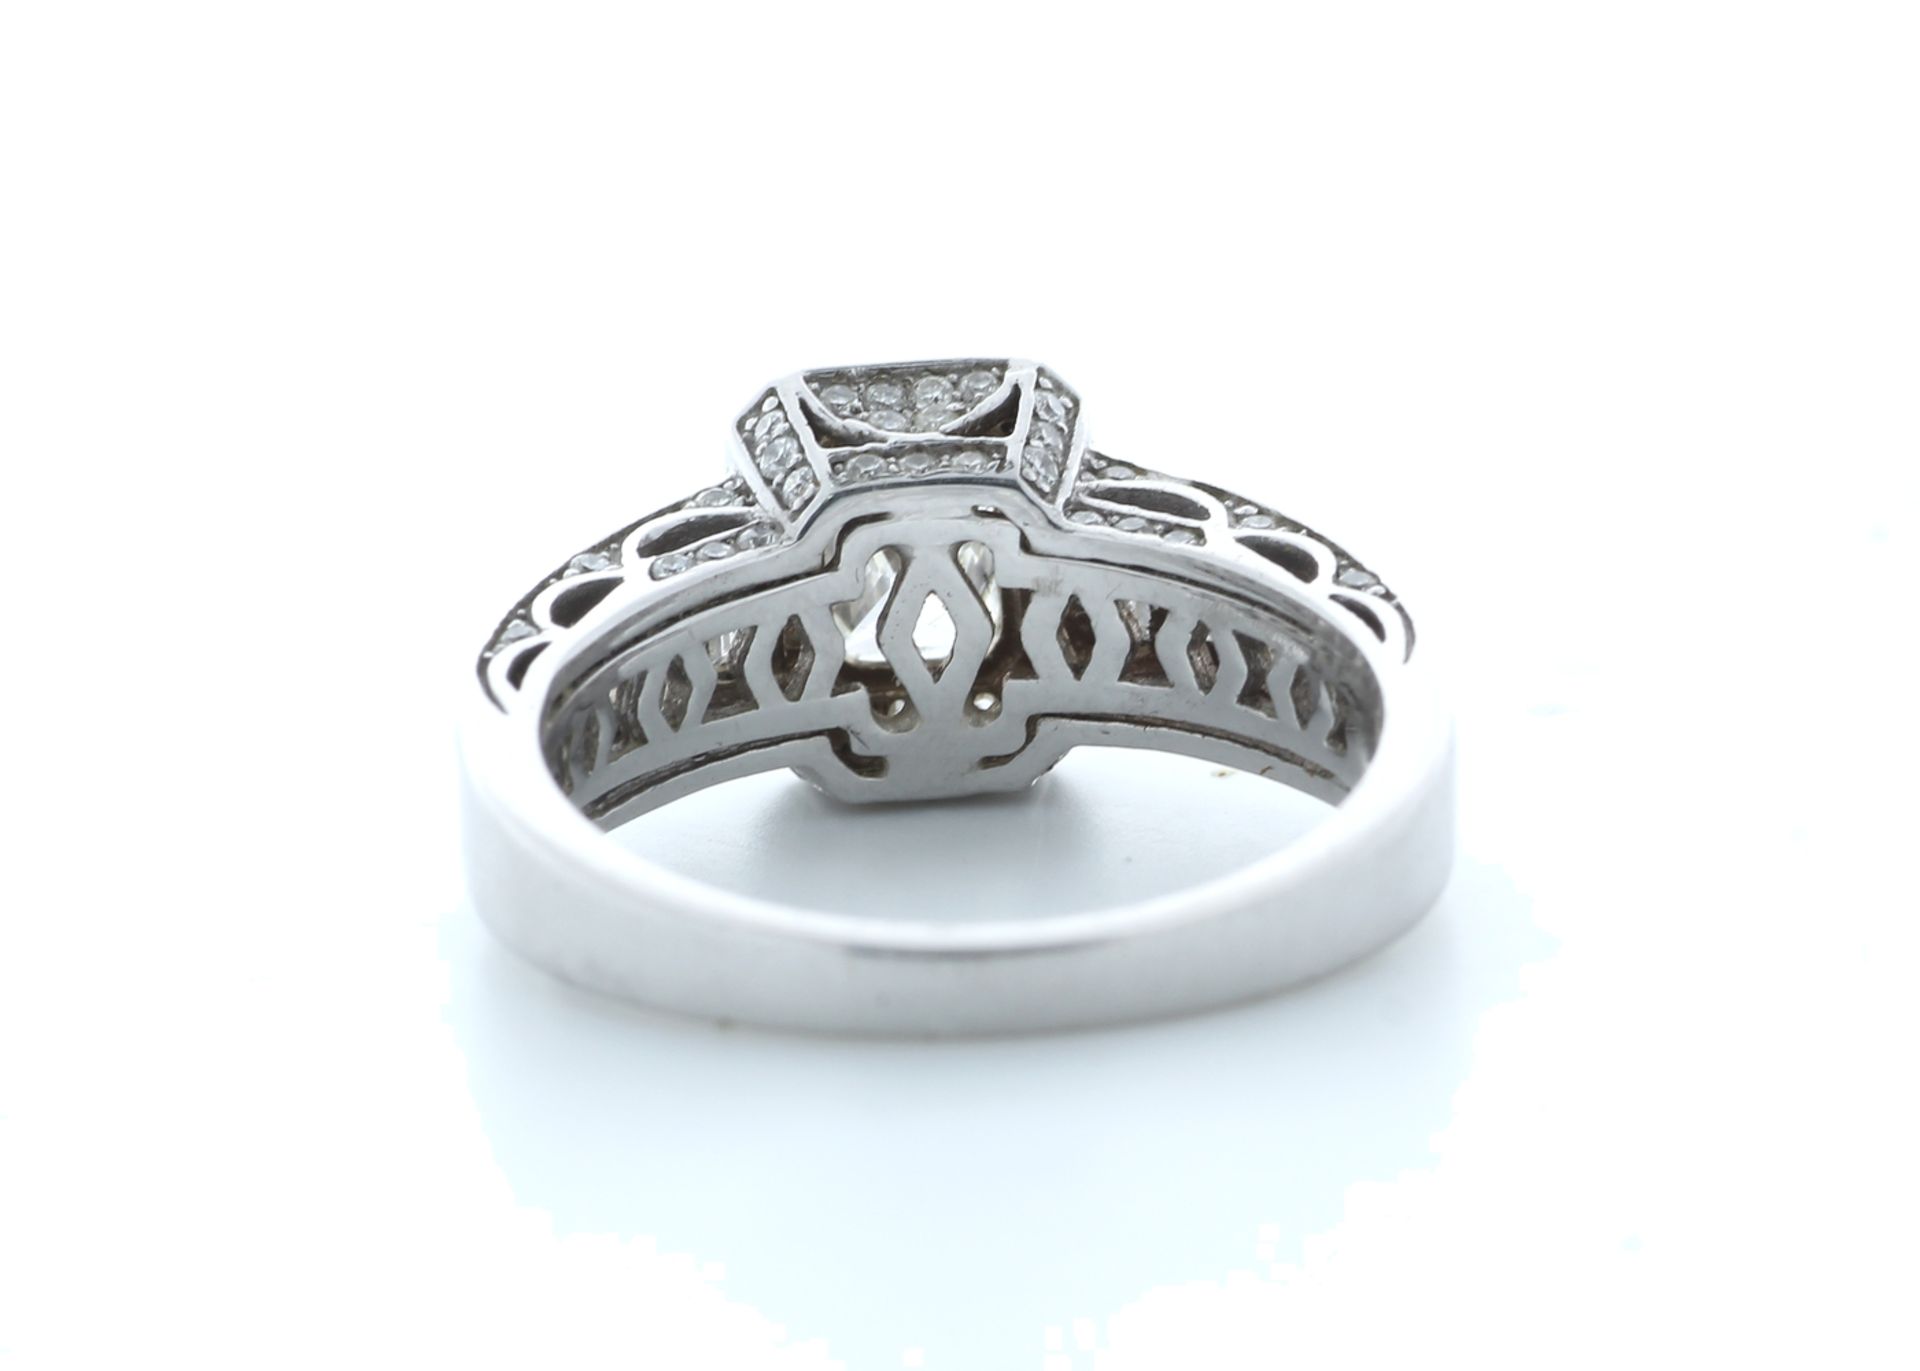 18ct White Gold Flawless Radiant Diamond With Halo Setting Ring 2.17 (0.95) Carats - Image 3 of 5